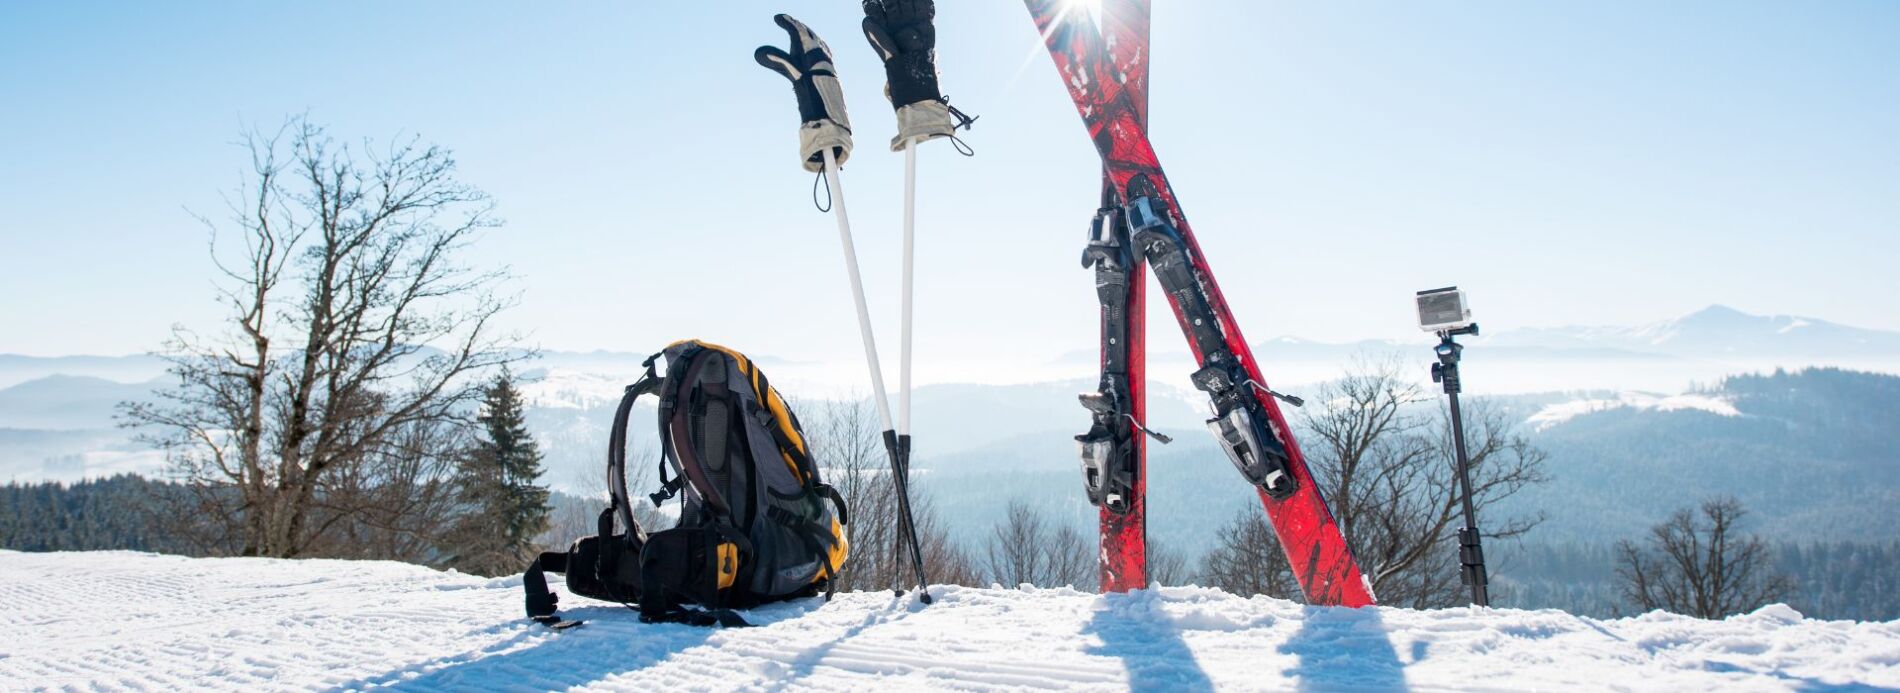 Where to Rent Ski Equipment in Snowmass Feature Image